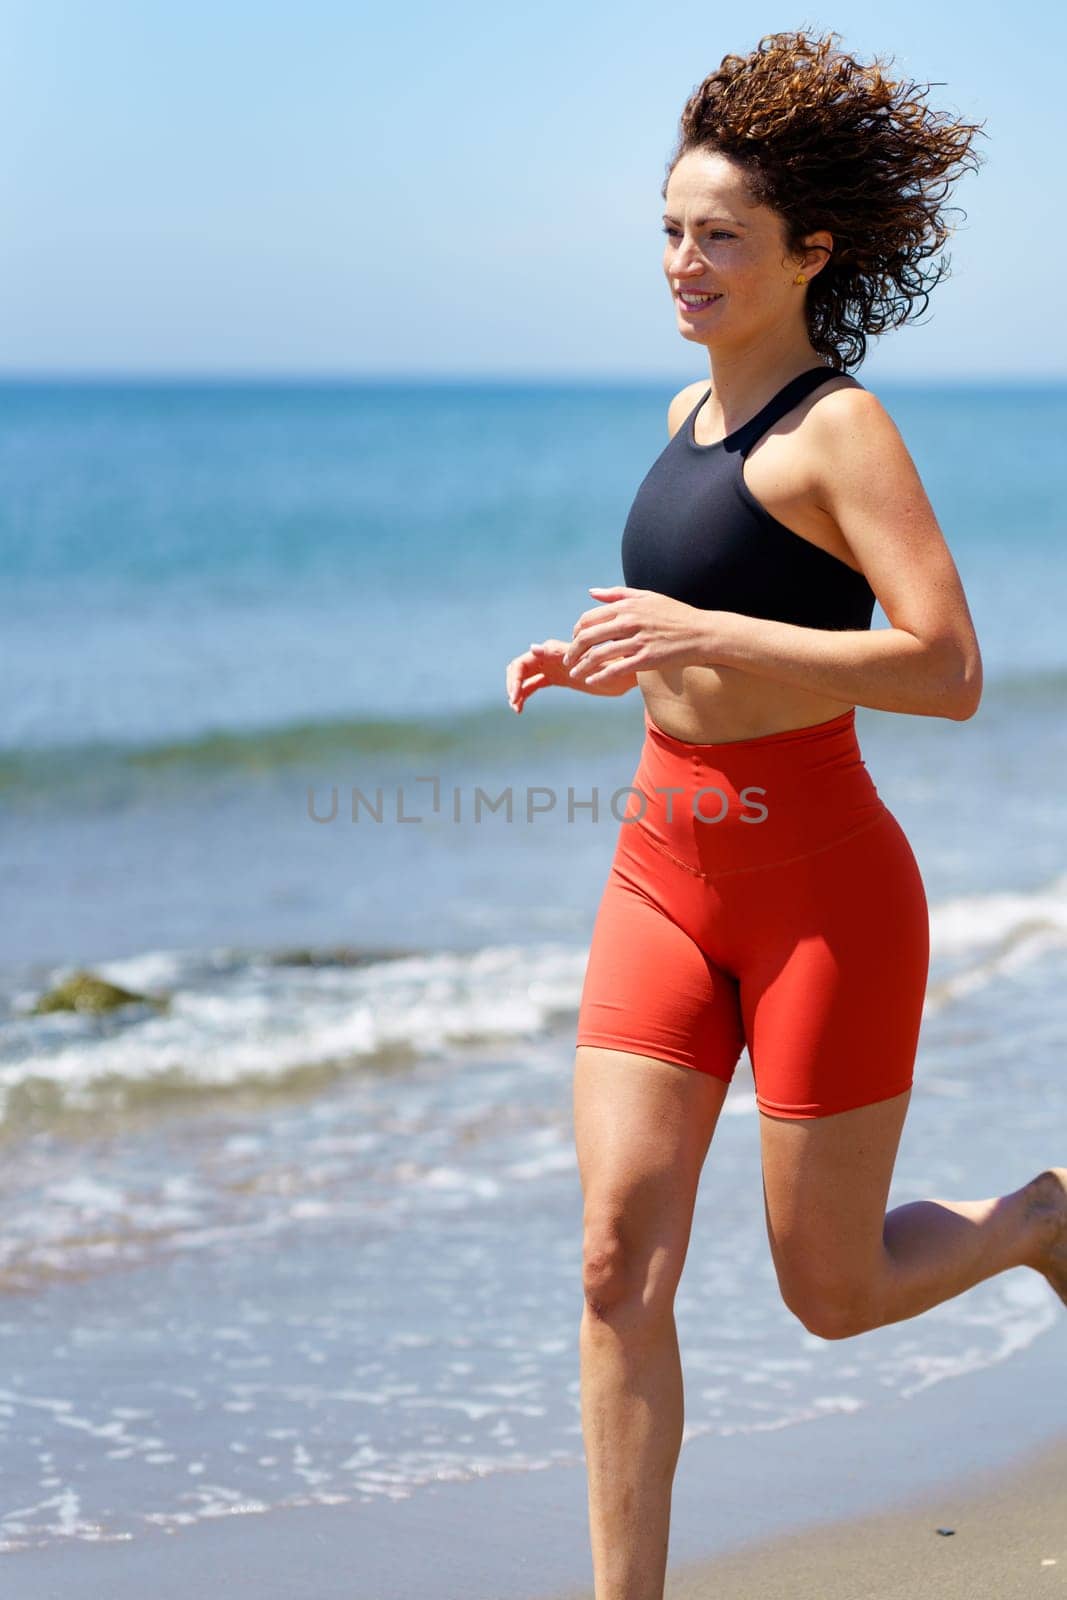 Side view of barefoot young female in sportswear with curly hair smiling and looking away, while jogging in daylight on sandy beach near foamy seawater against blurred blue sky